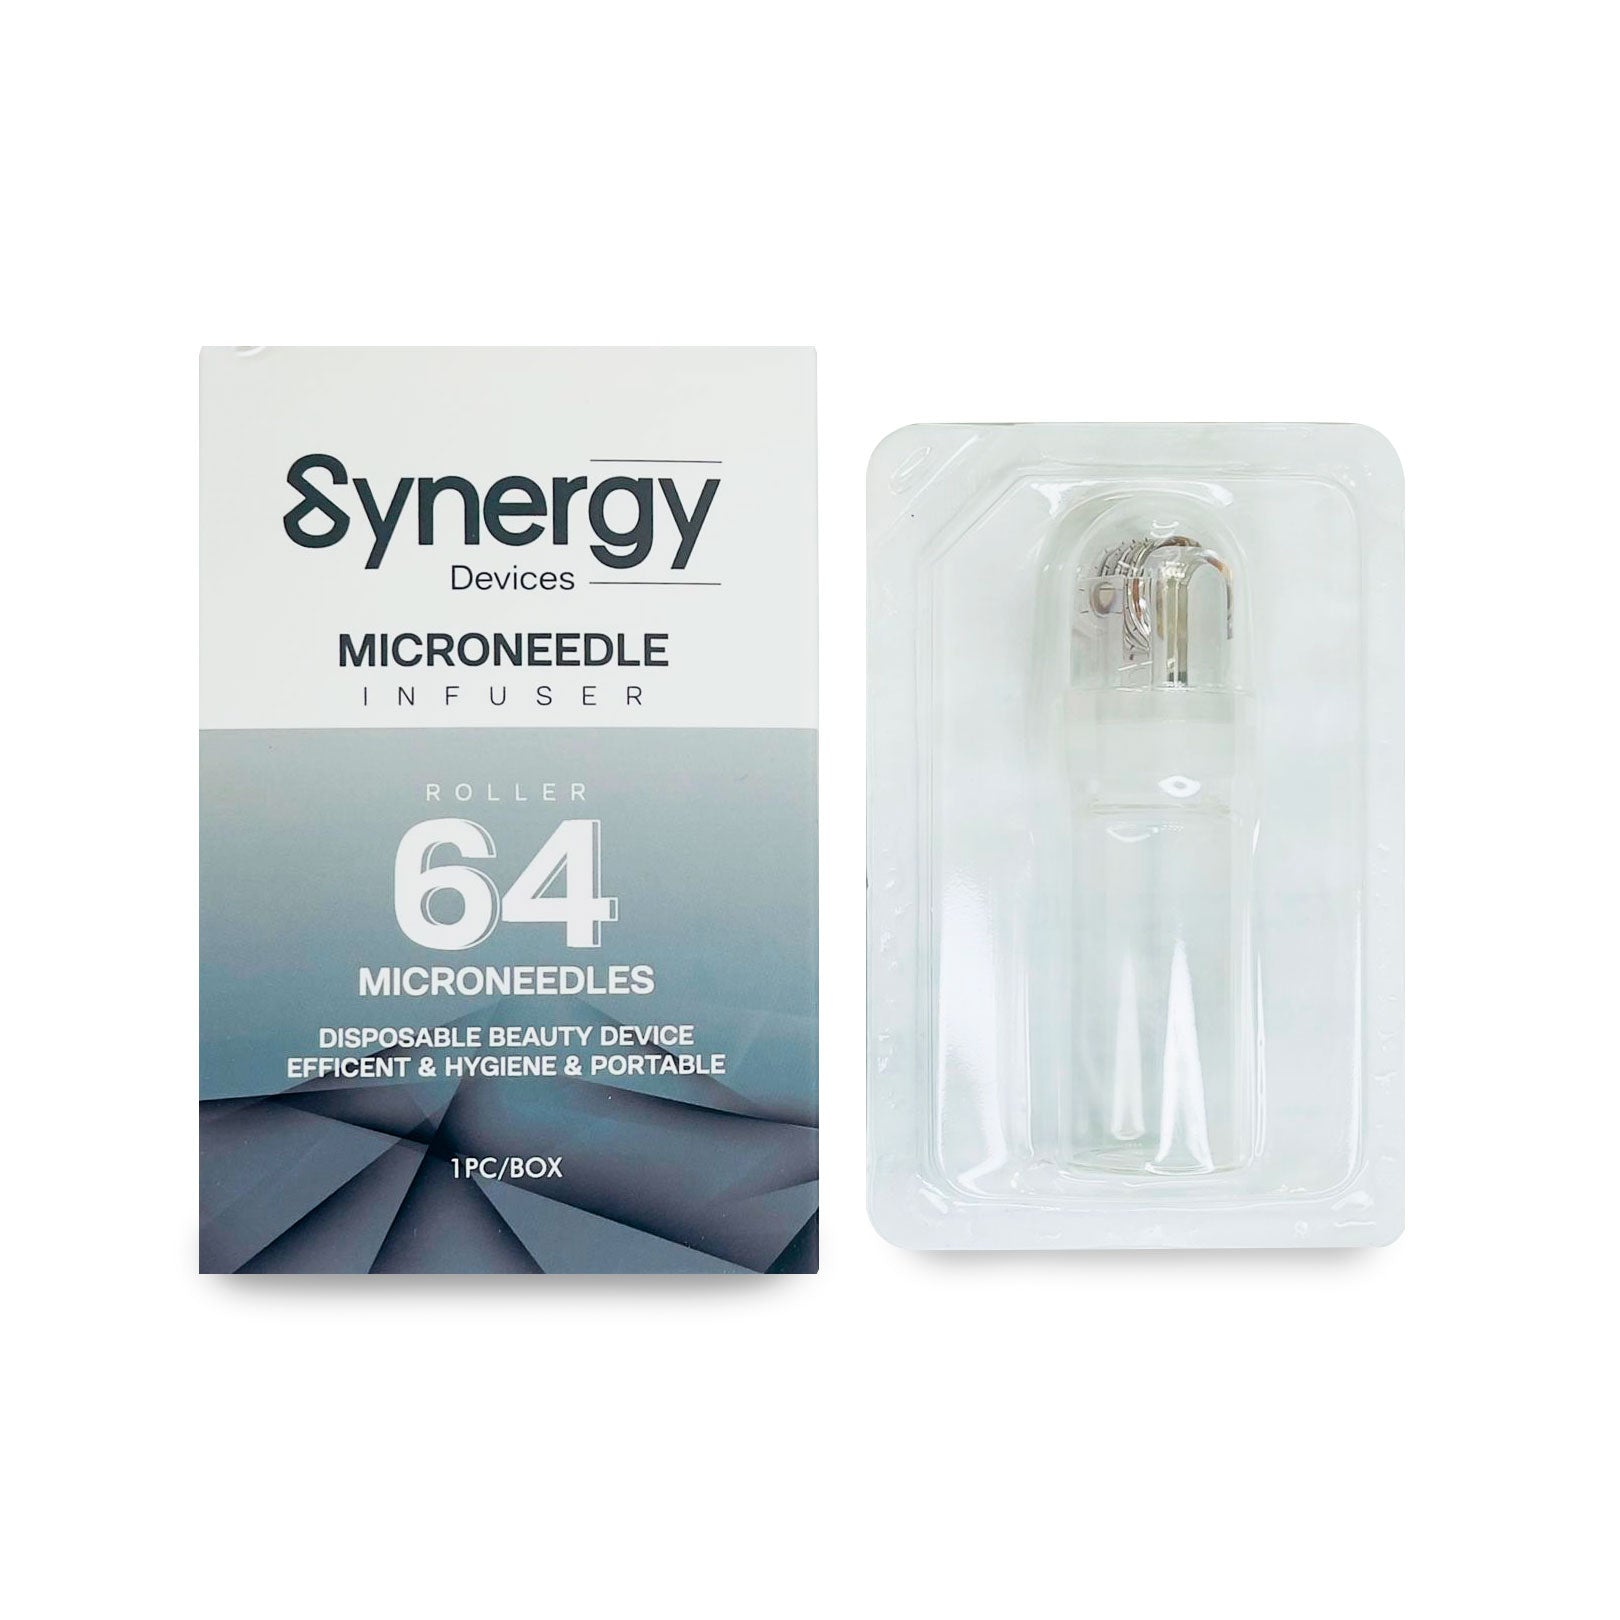 Microneedle Infuser Synergy, Microneedles for Mesotherapy